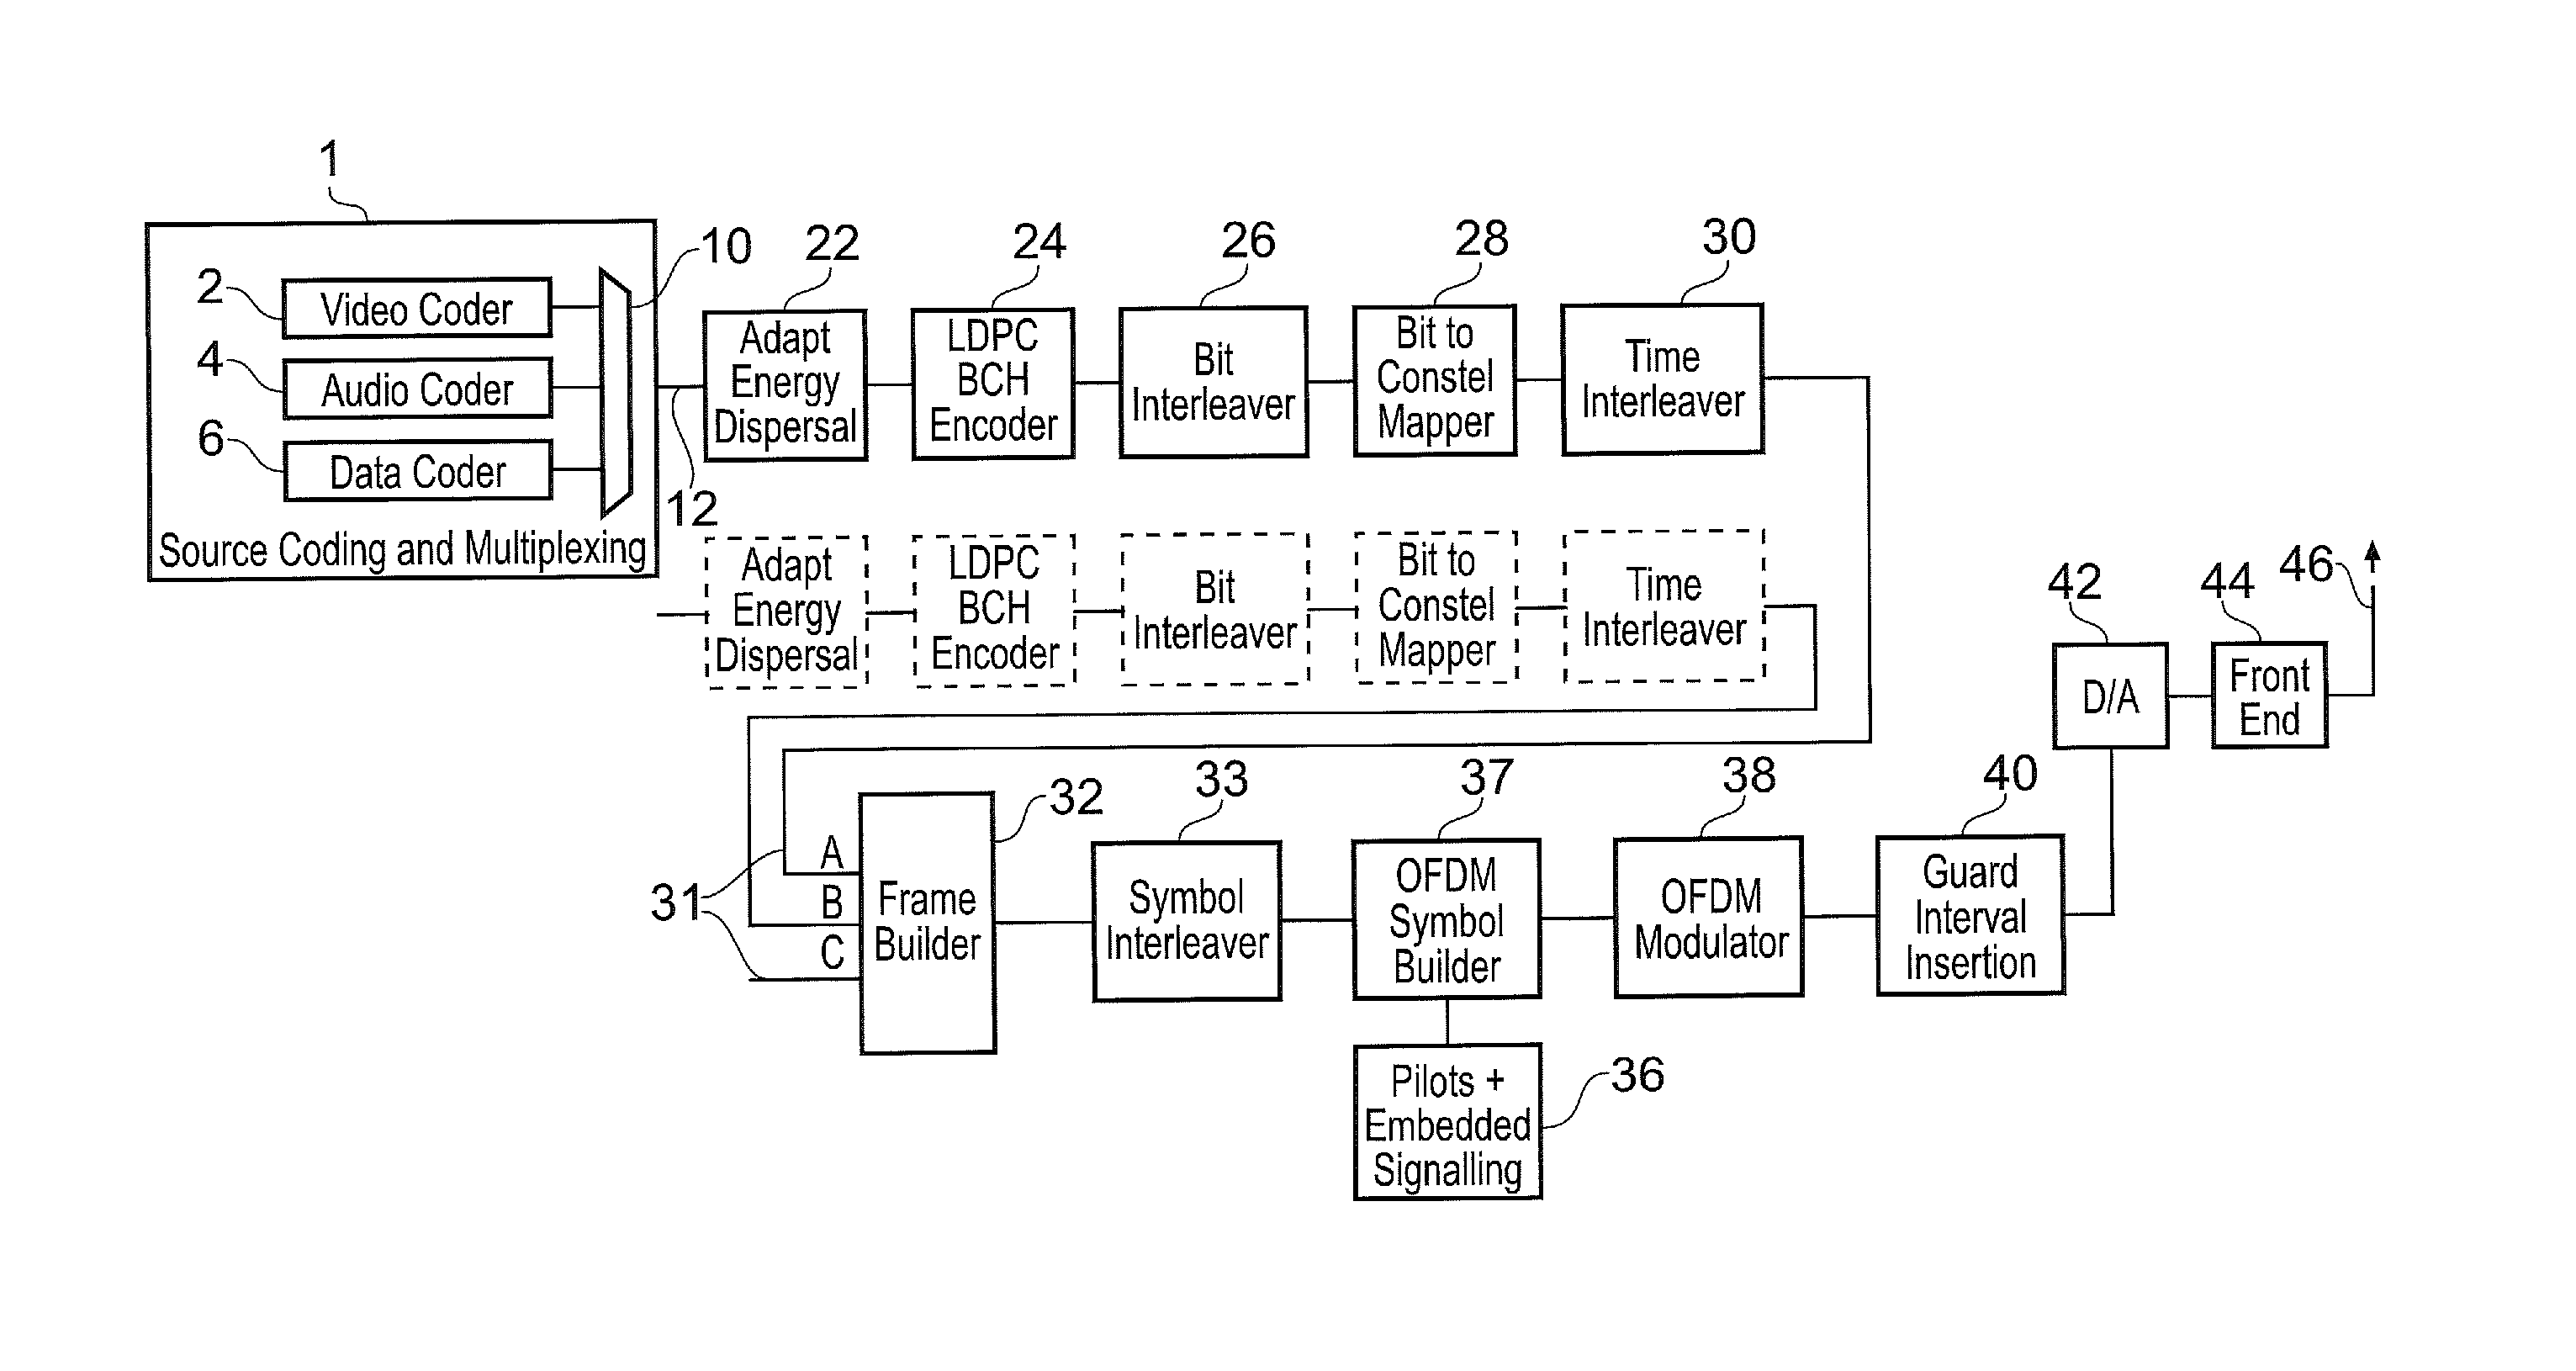 6mhz bandwidth OFDM transmitter with the same guard interval as 8mhz dvb-t2